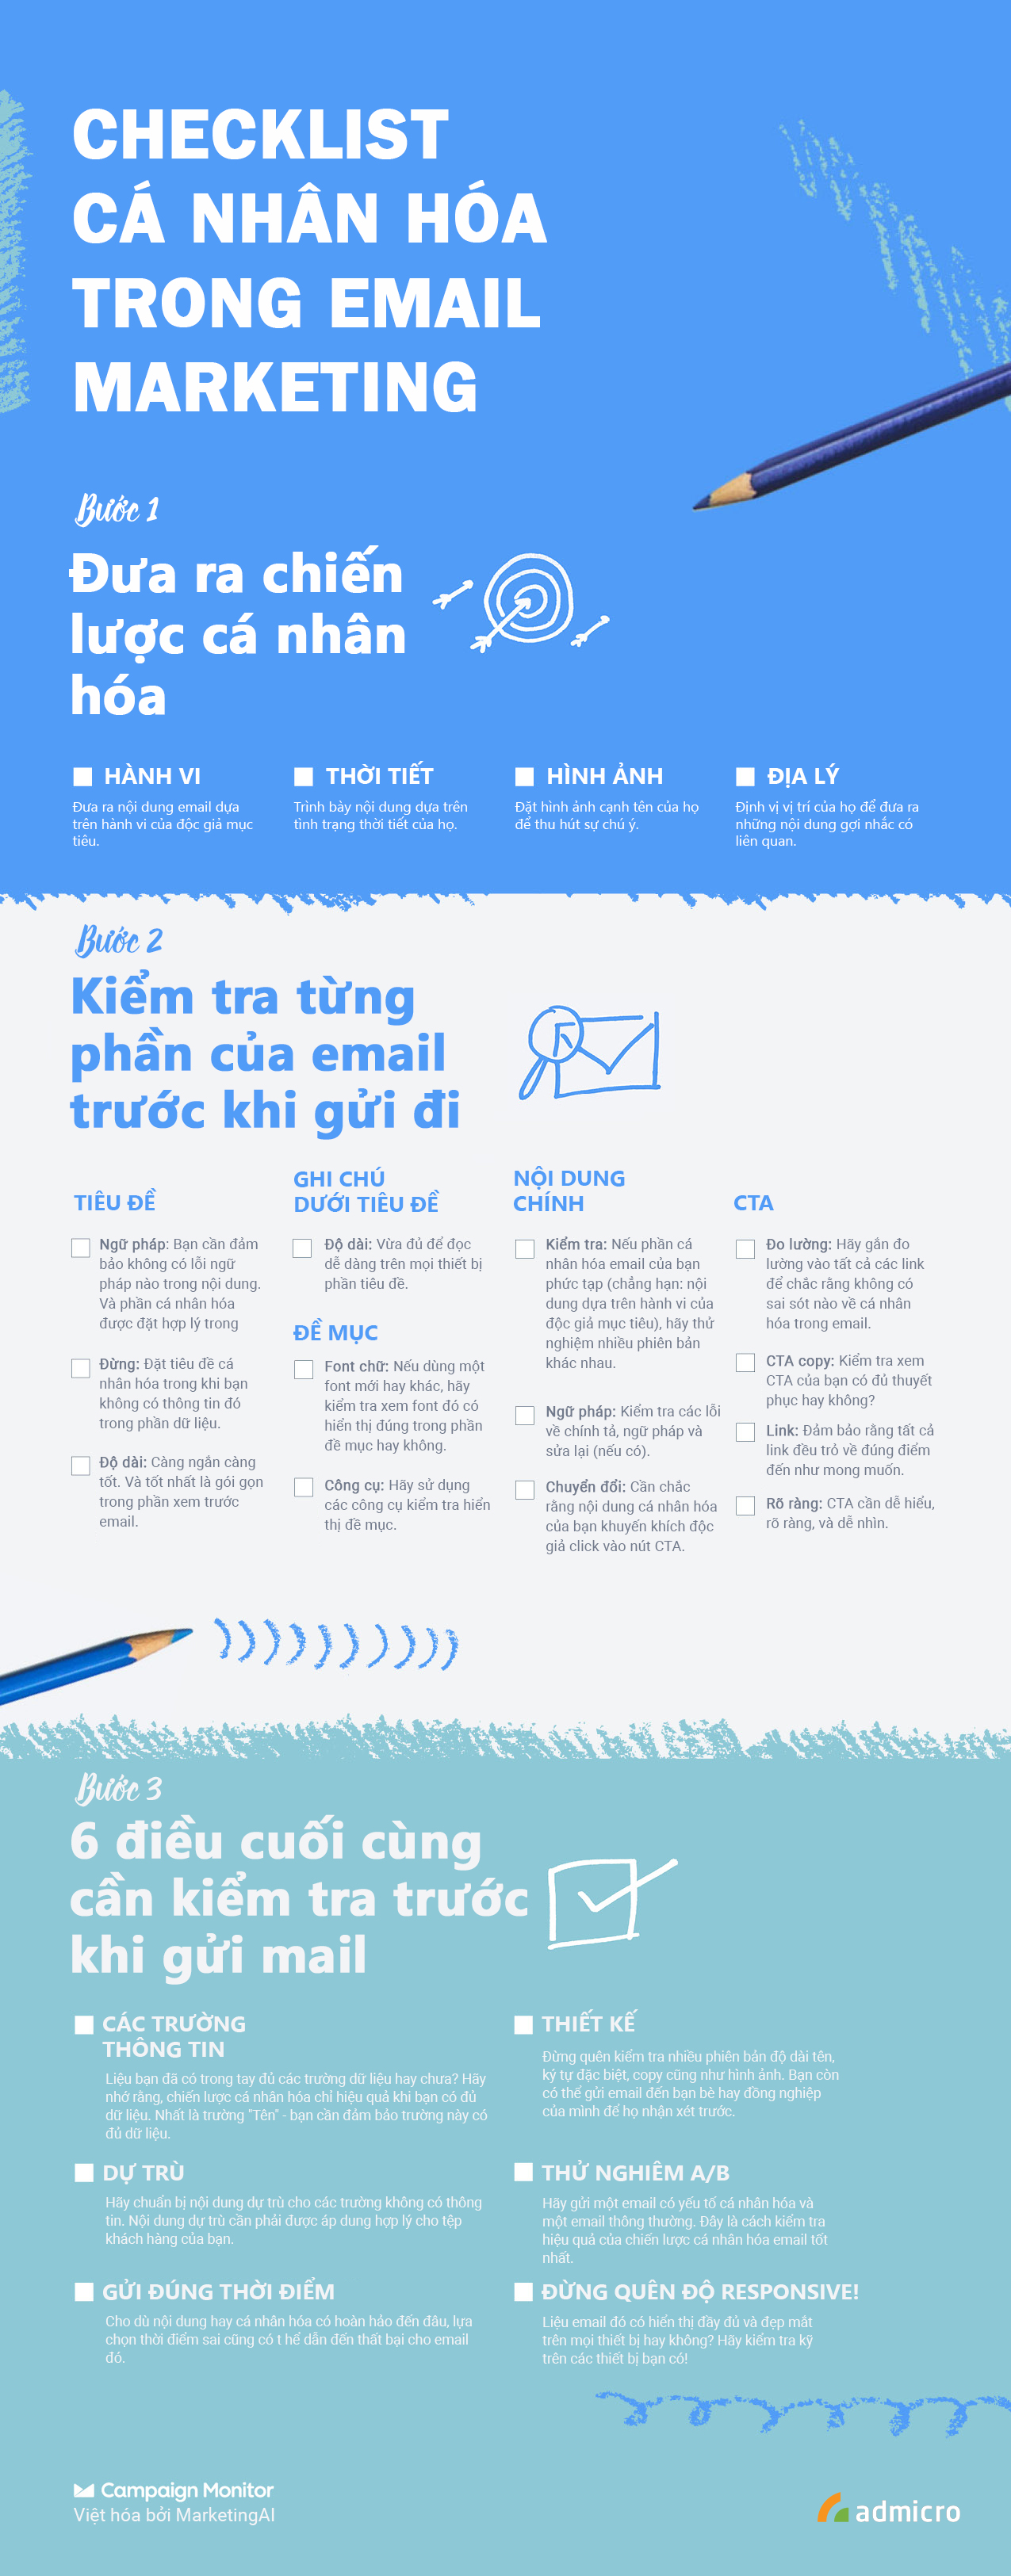 Template/Checklist - Dạng nội dung content thường dùng trong Email marketing